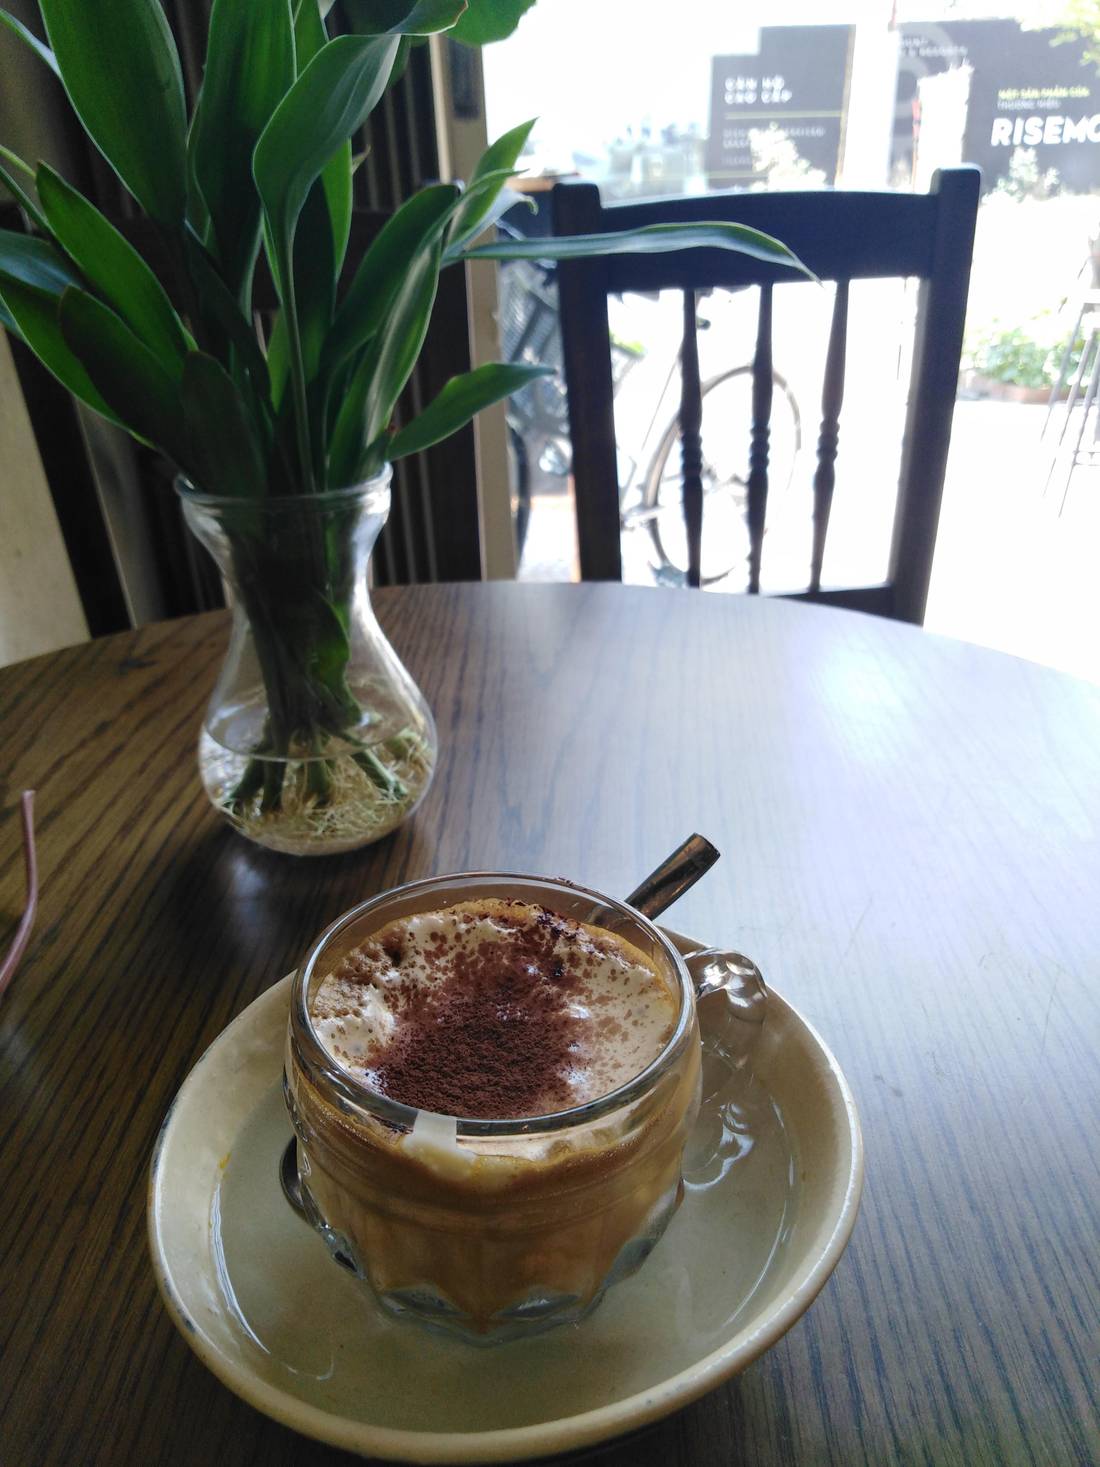 Egg coffee: another crazy coffee of Vietnam